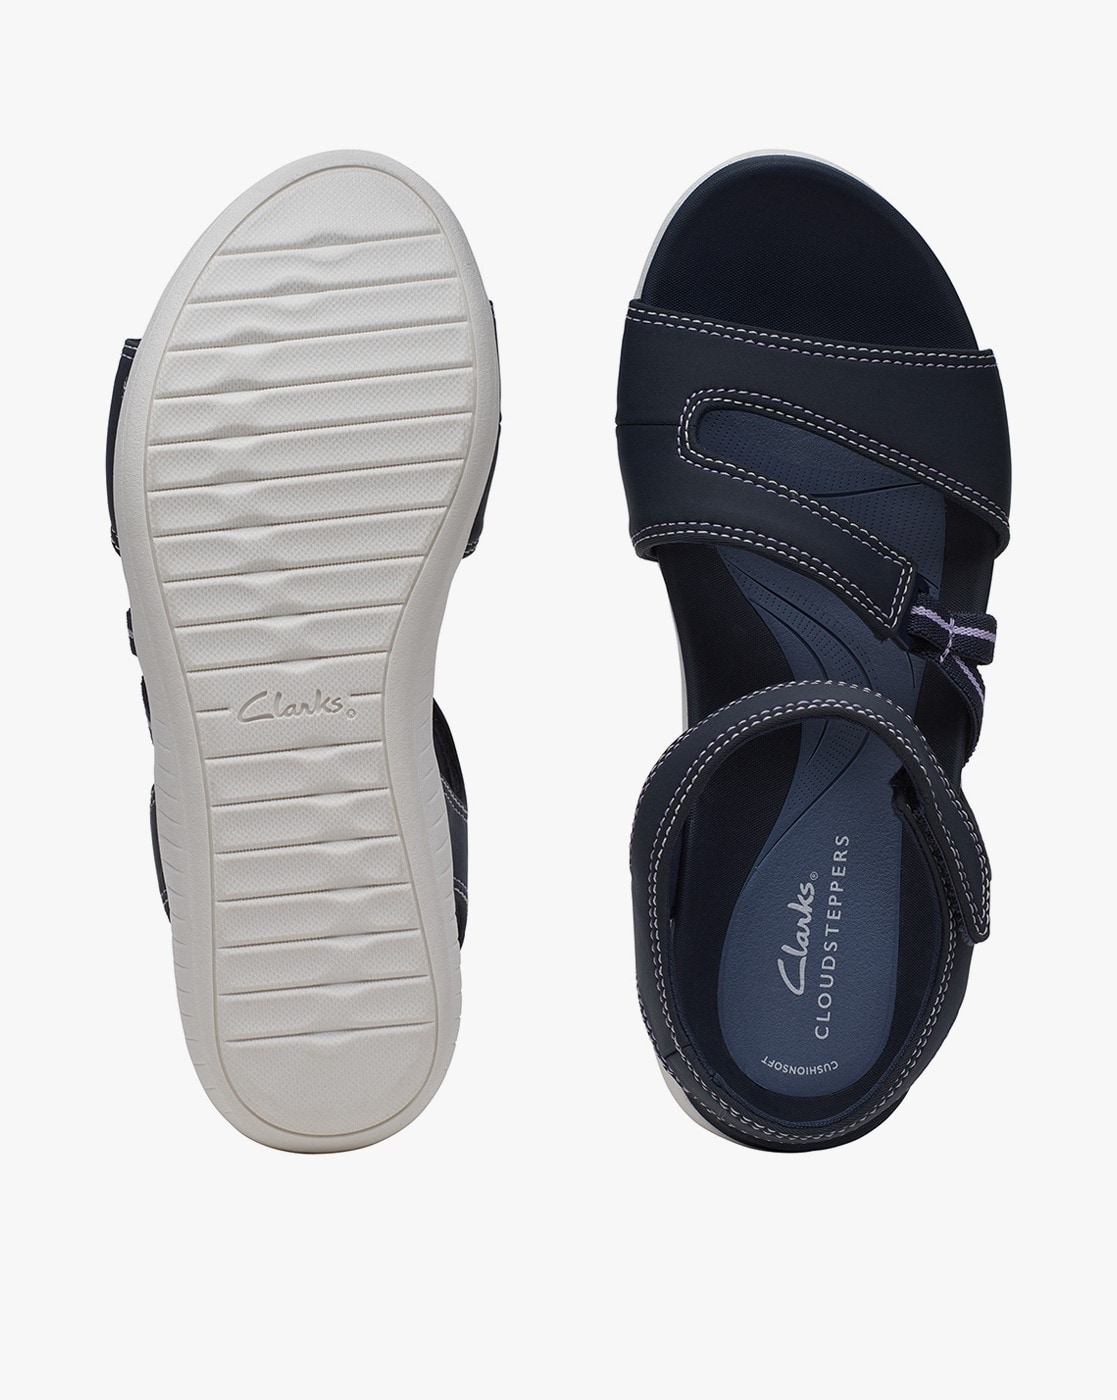 Clarks Cloudsteppers Perforated Sandal -Drift Fern - QVC.com